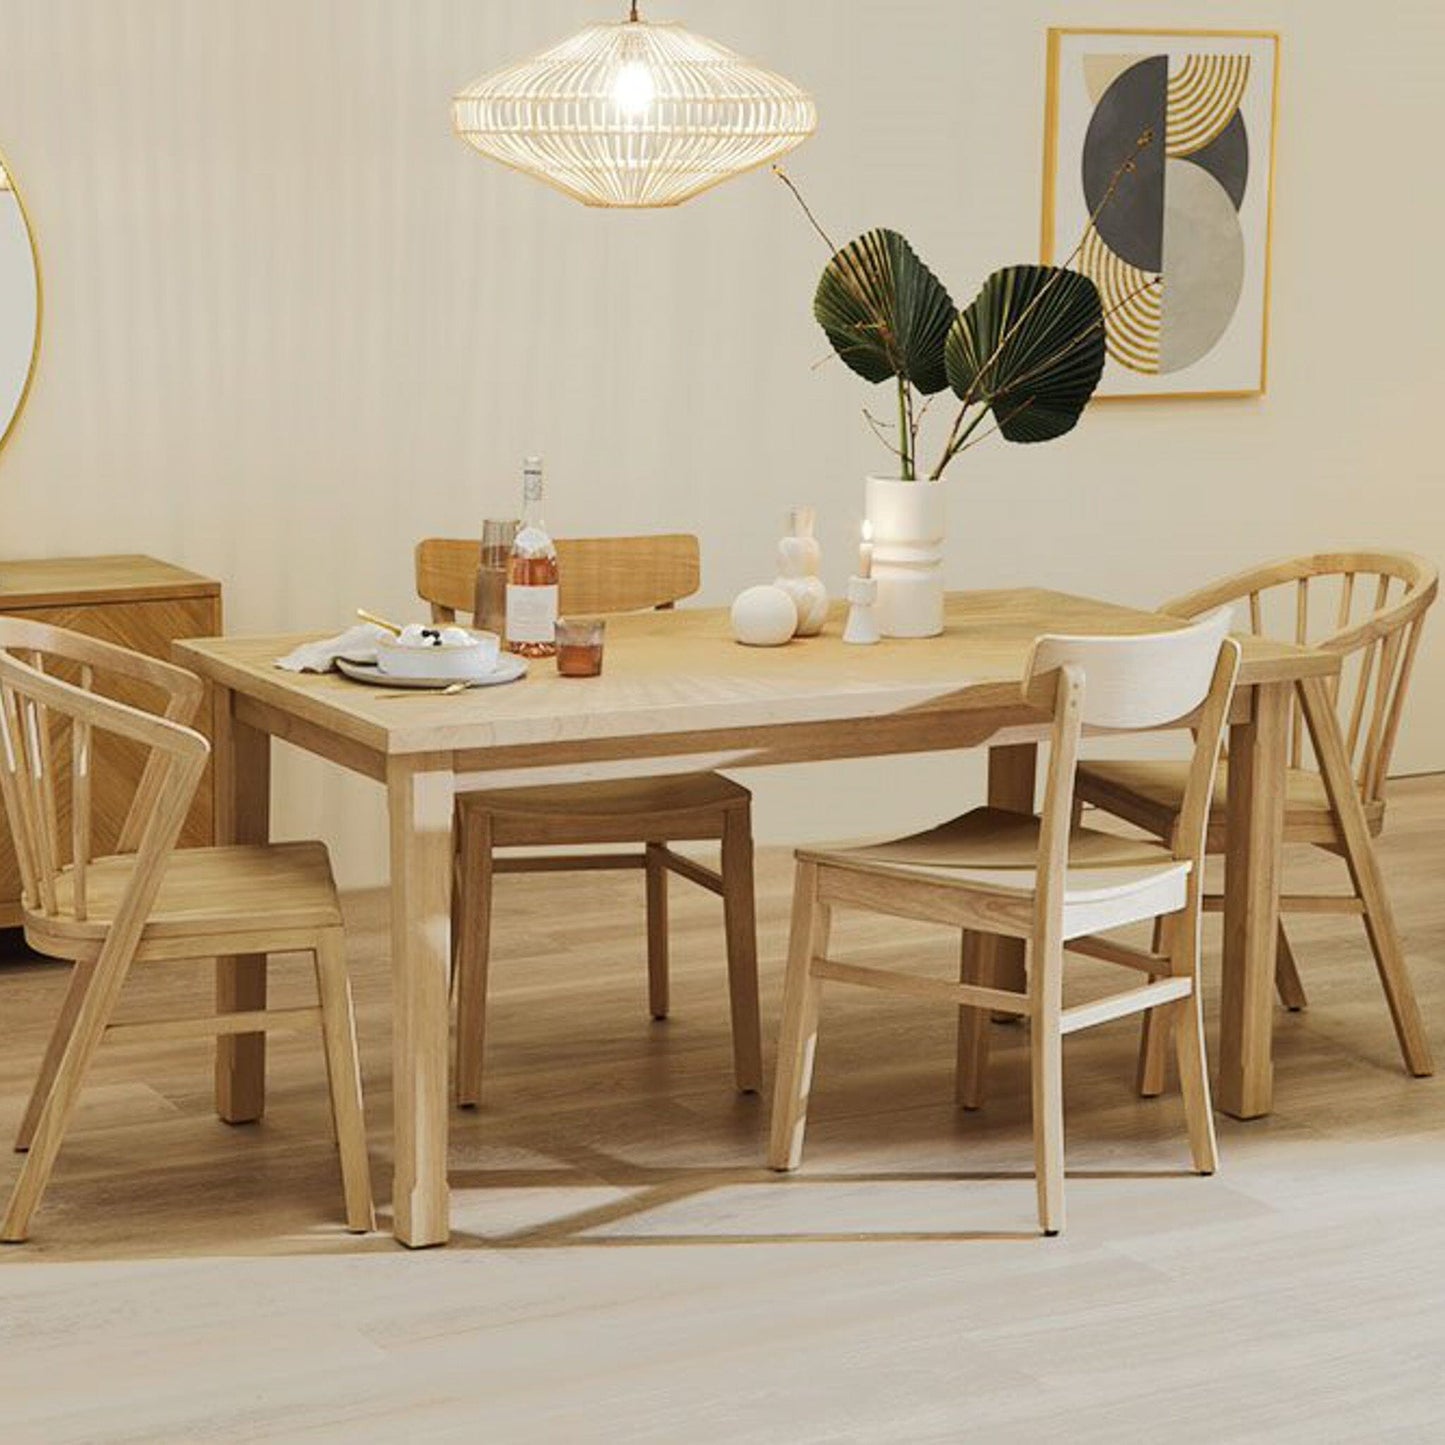 Wooden Spindle Dining Chairs Set of 2 - Pale Oak